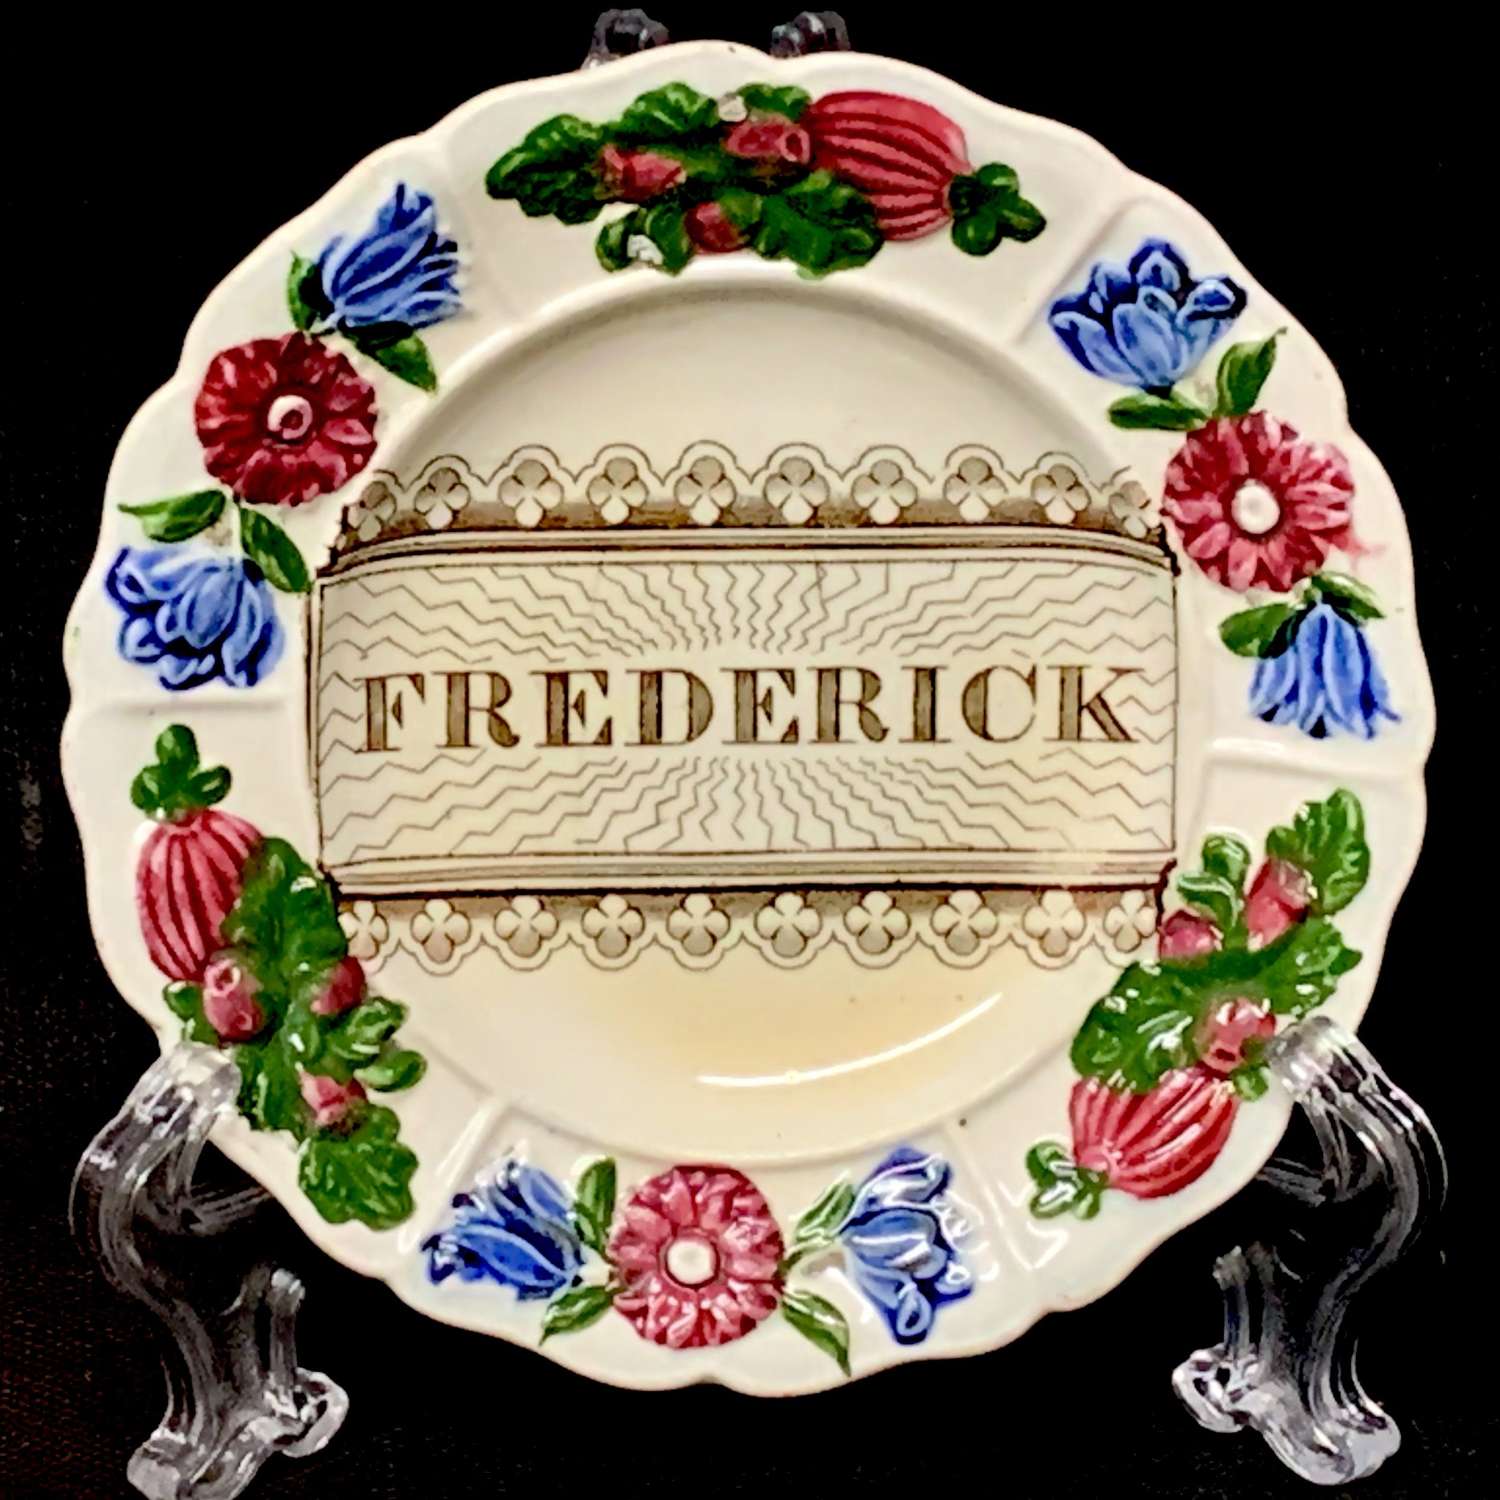 Staffordshire Childs Pearlware Name Plate for FREDERICK 1830